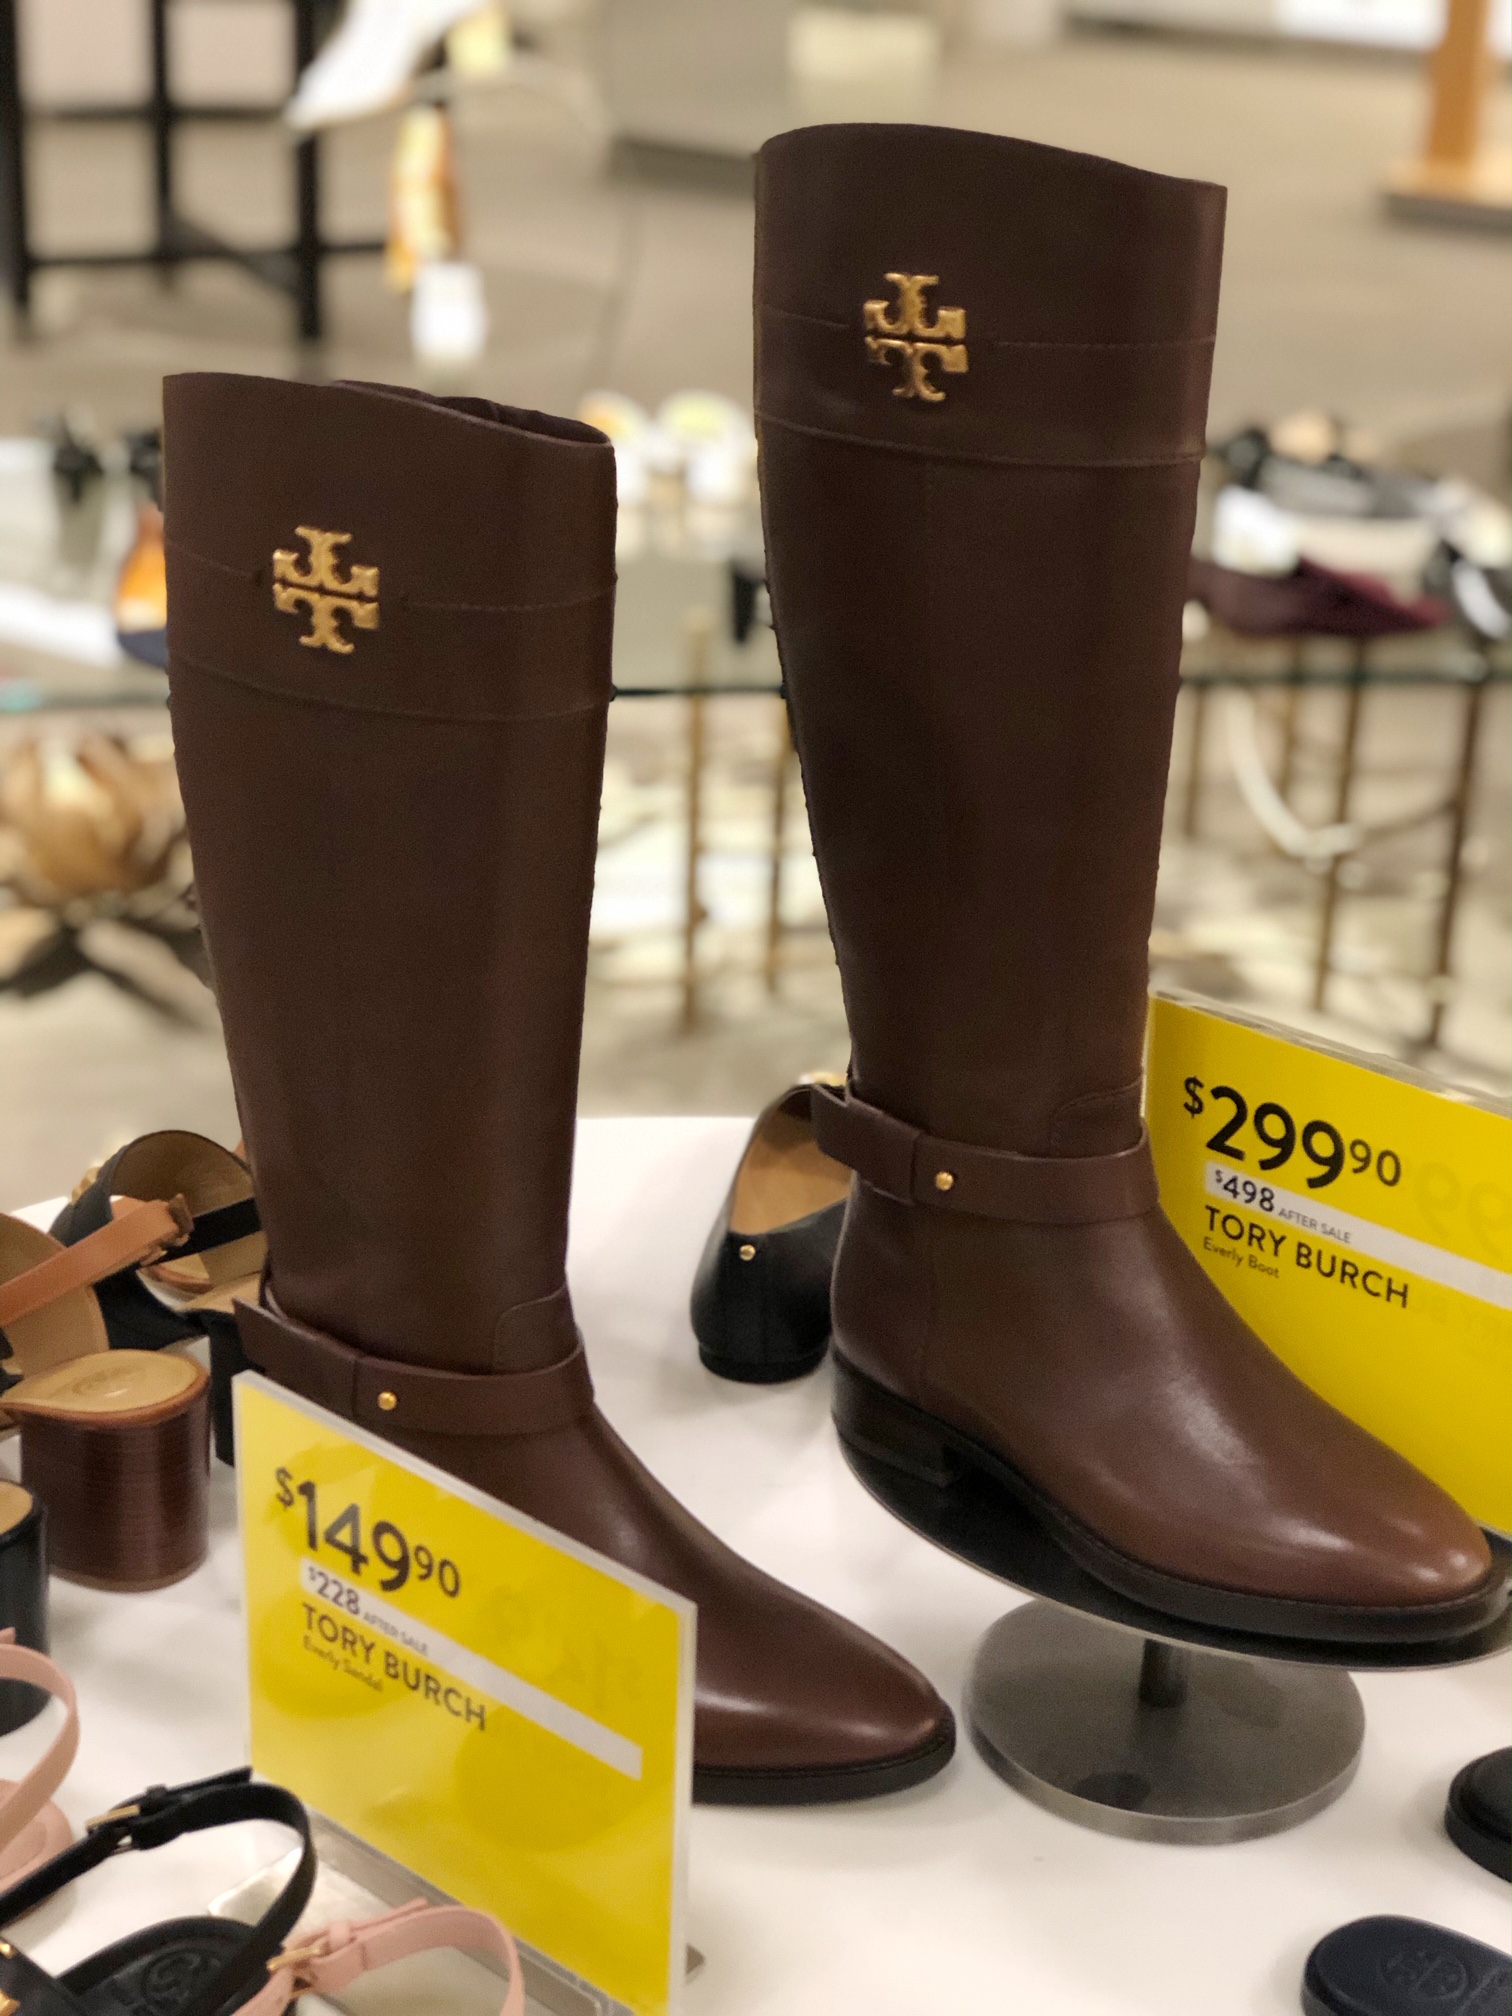 Tory Burch Outlet Boots Cheap Sale, SAVE 32% 